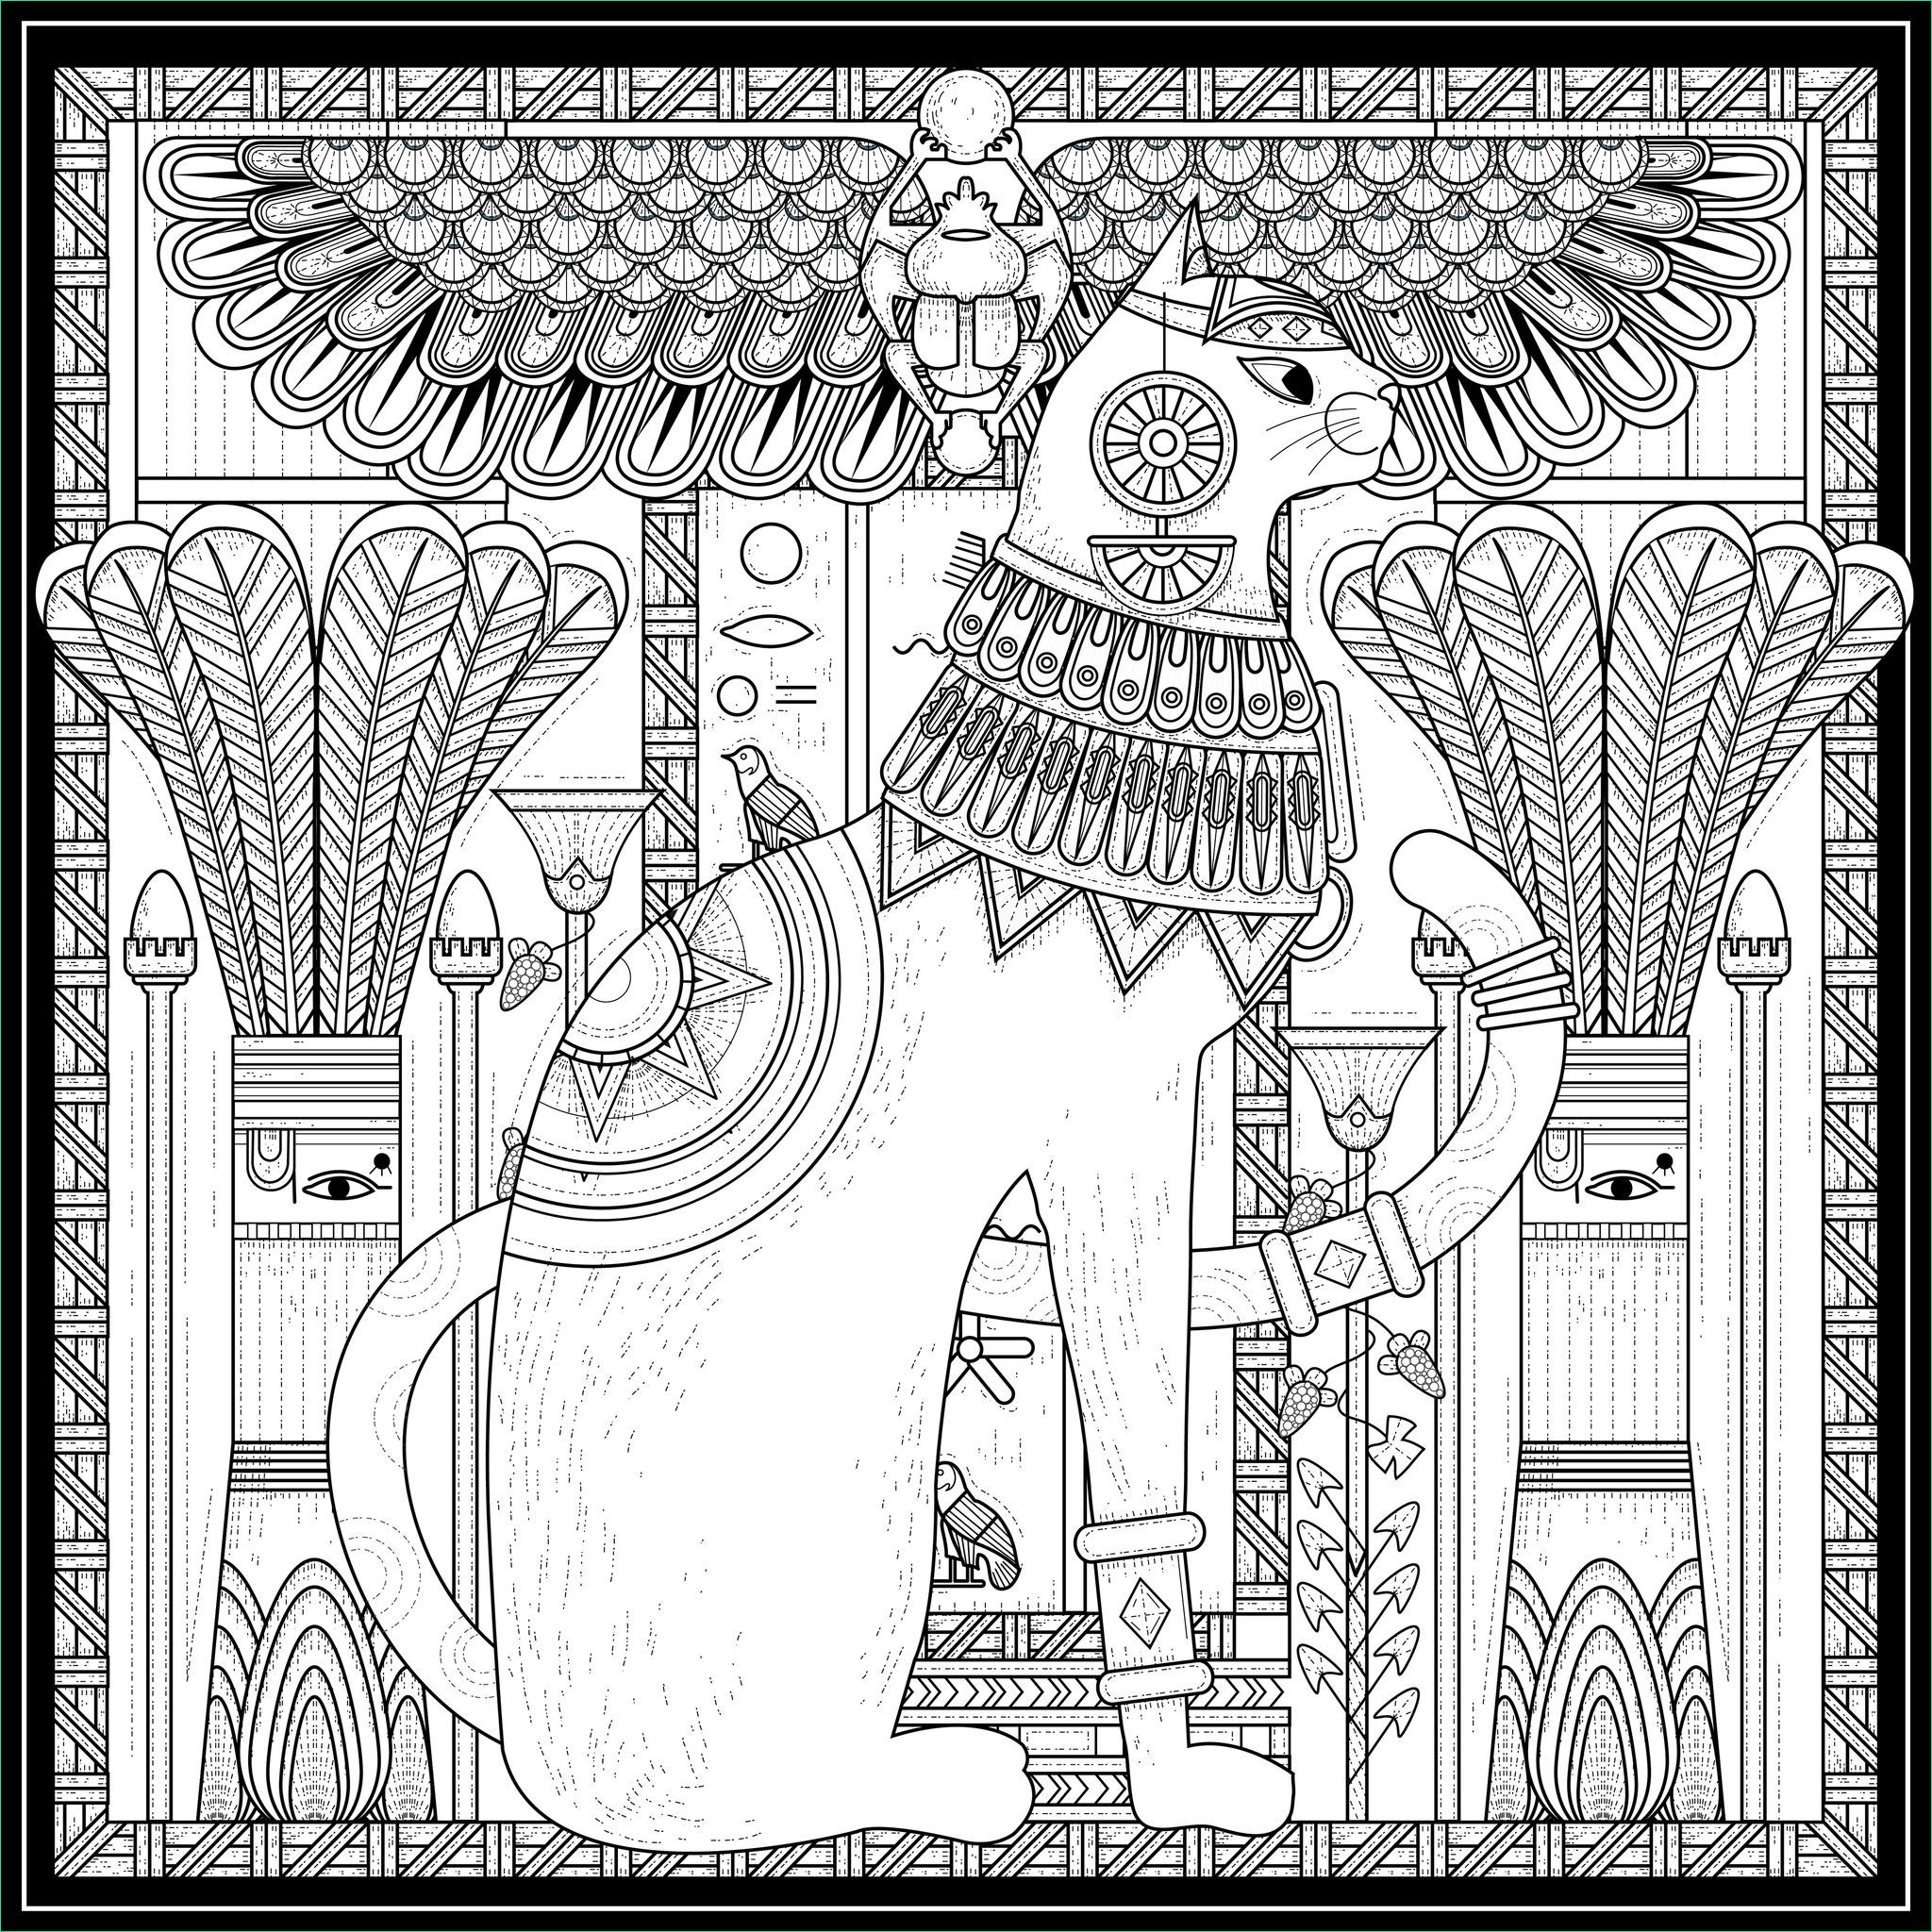 image=egypte et hieroglyphes coloring adult egypt cat egyptian style and symbols by kchung 1